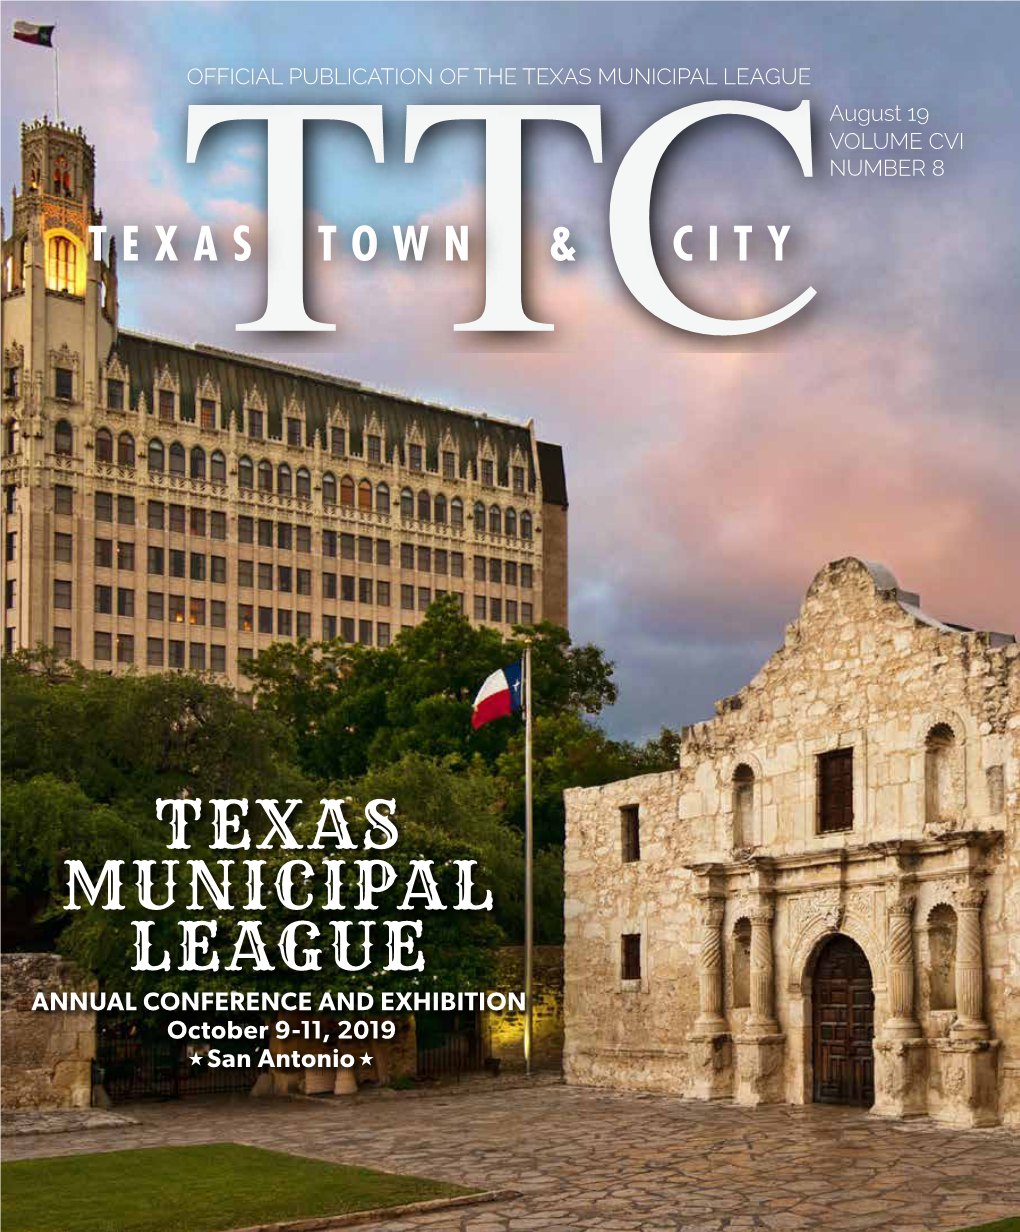 AUGUST 2019 Acectxtmlaug2019 Layout 1 2/20/19 2:46 PM Page 1 Engineering Texas